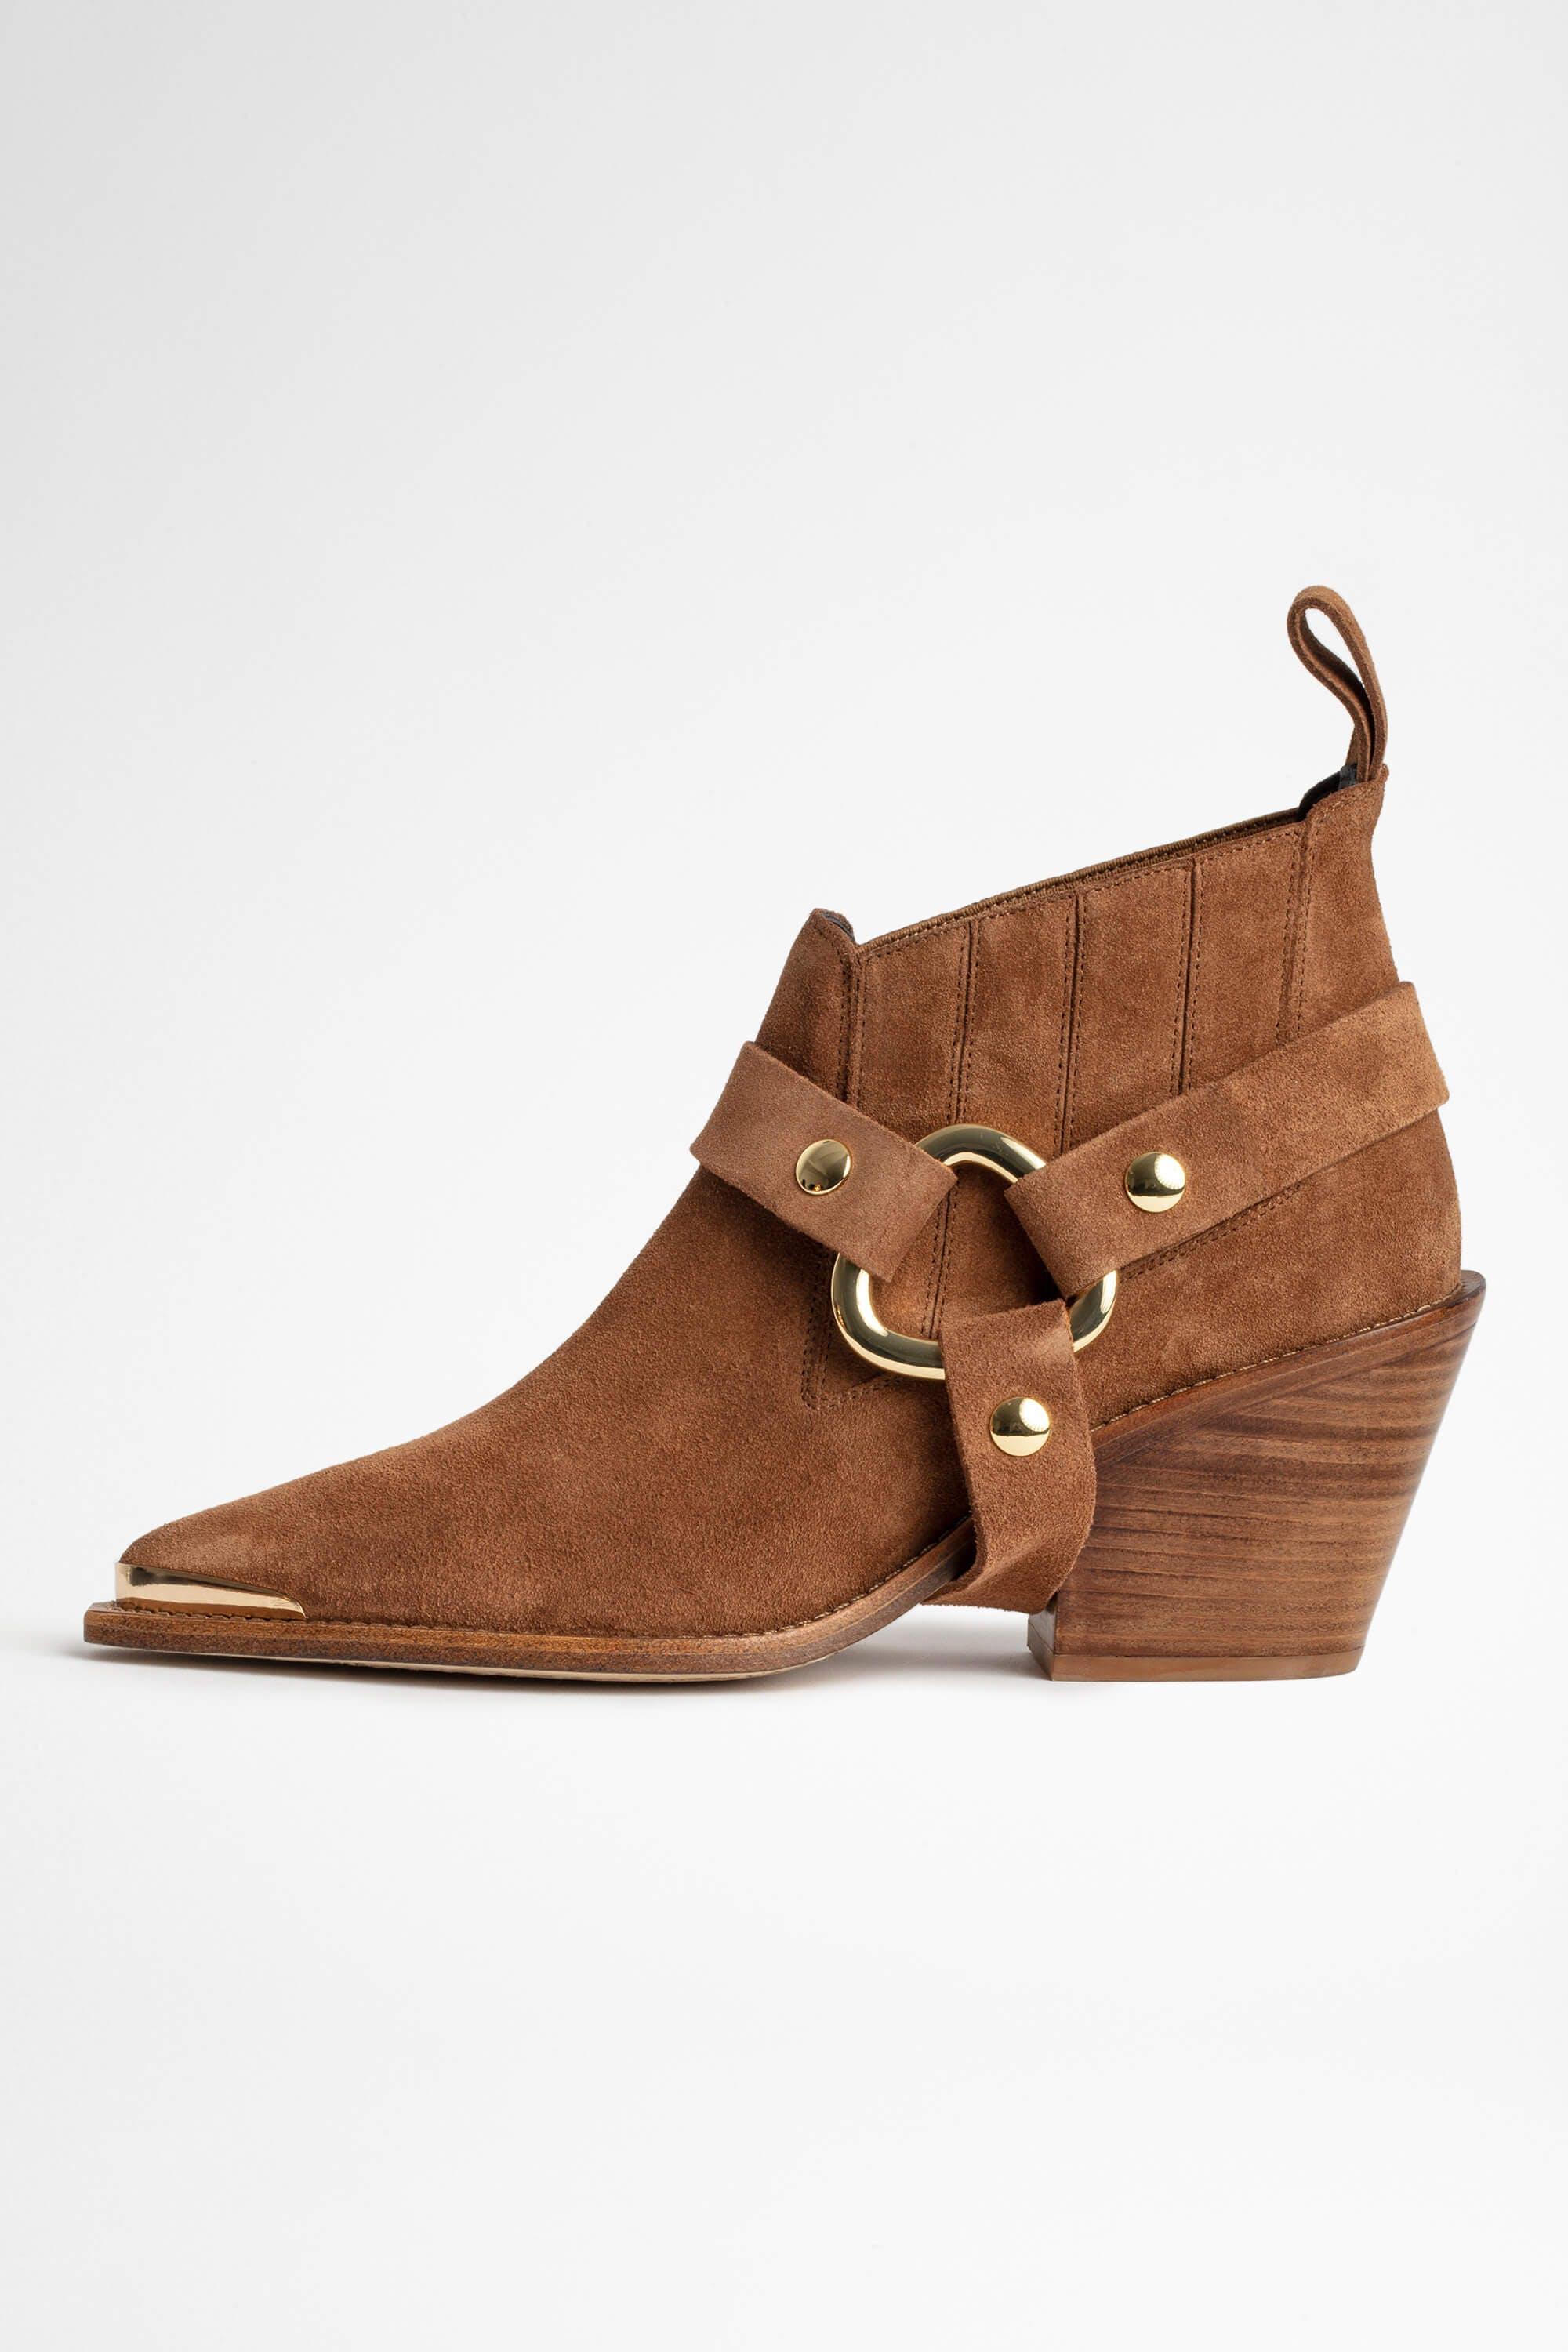 & Voltaire N'dricks Suede Ankle Boots in Brown Lyst